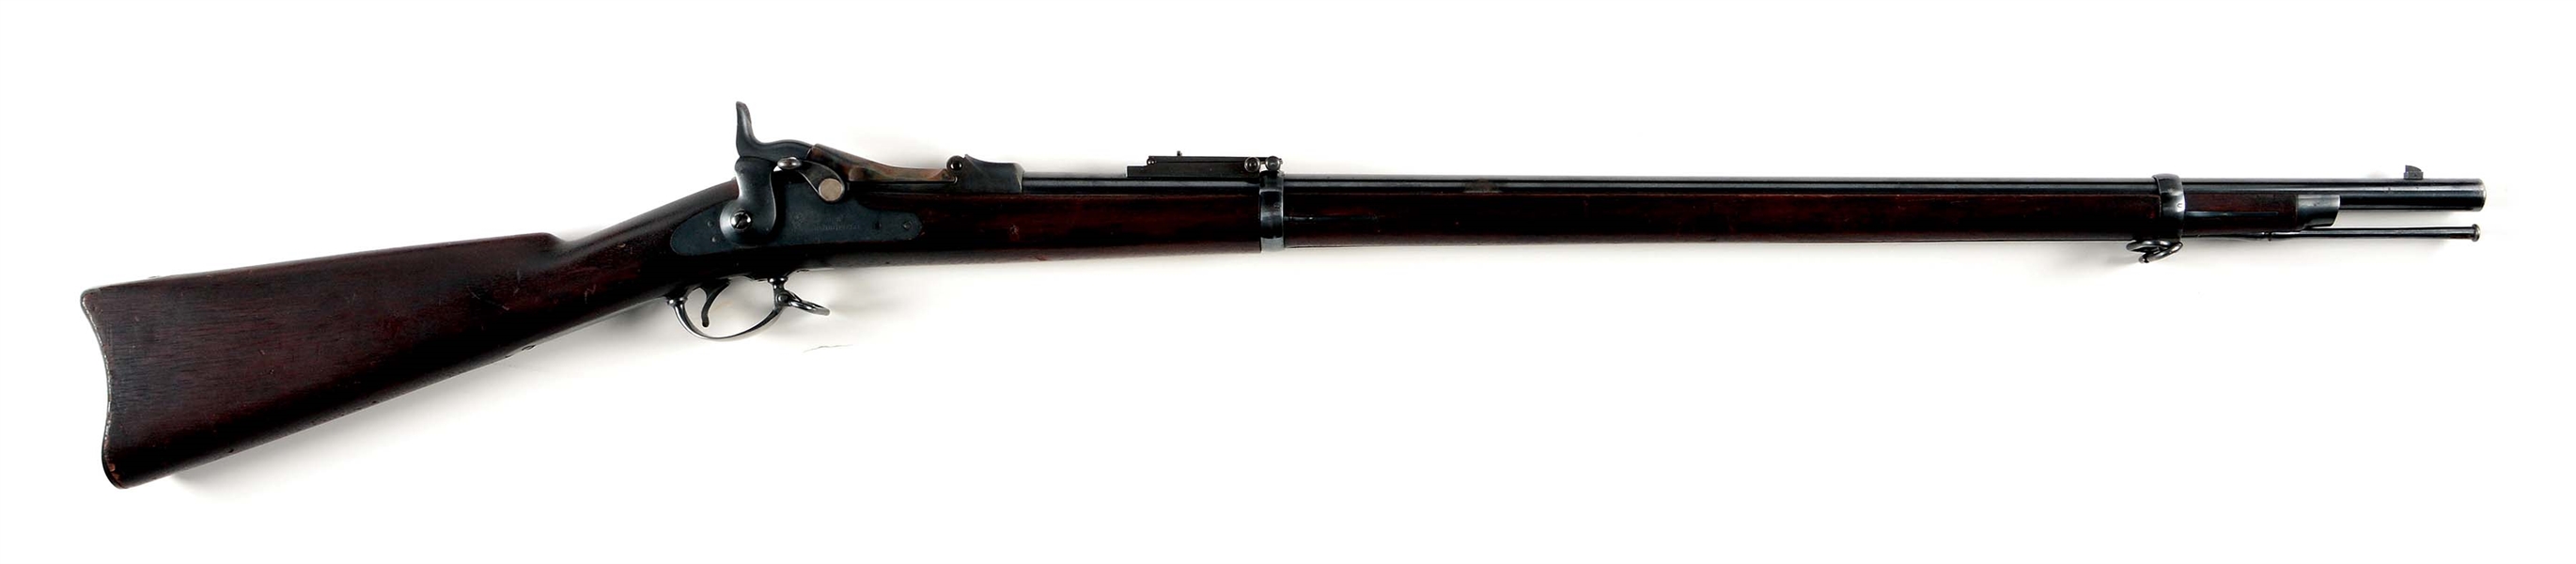 (A) NEAR NEW CONDITION US SPRINGFIELD MODEL 1884 TRAPDOOR RIFLE.